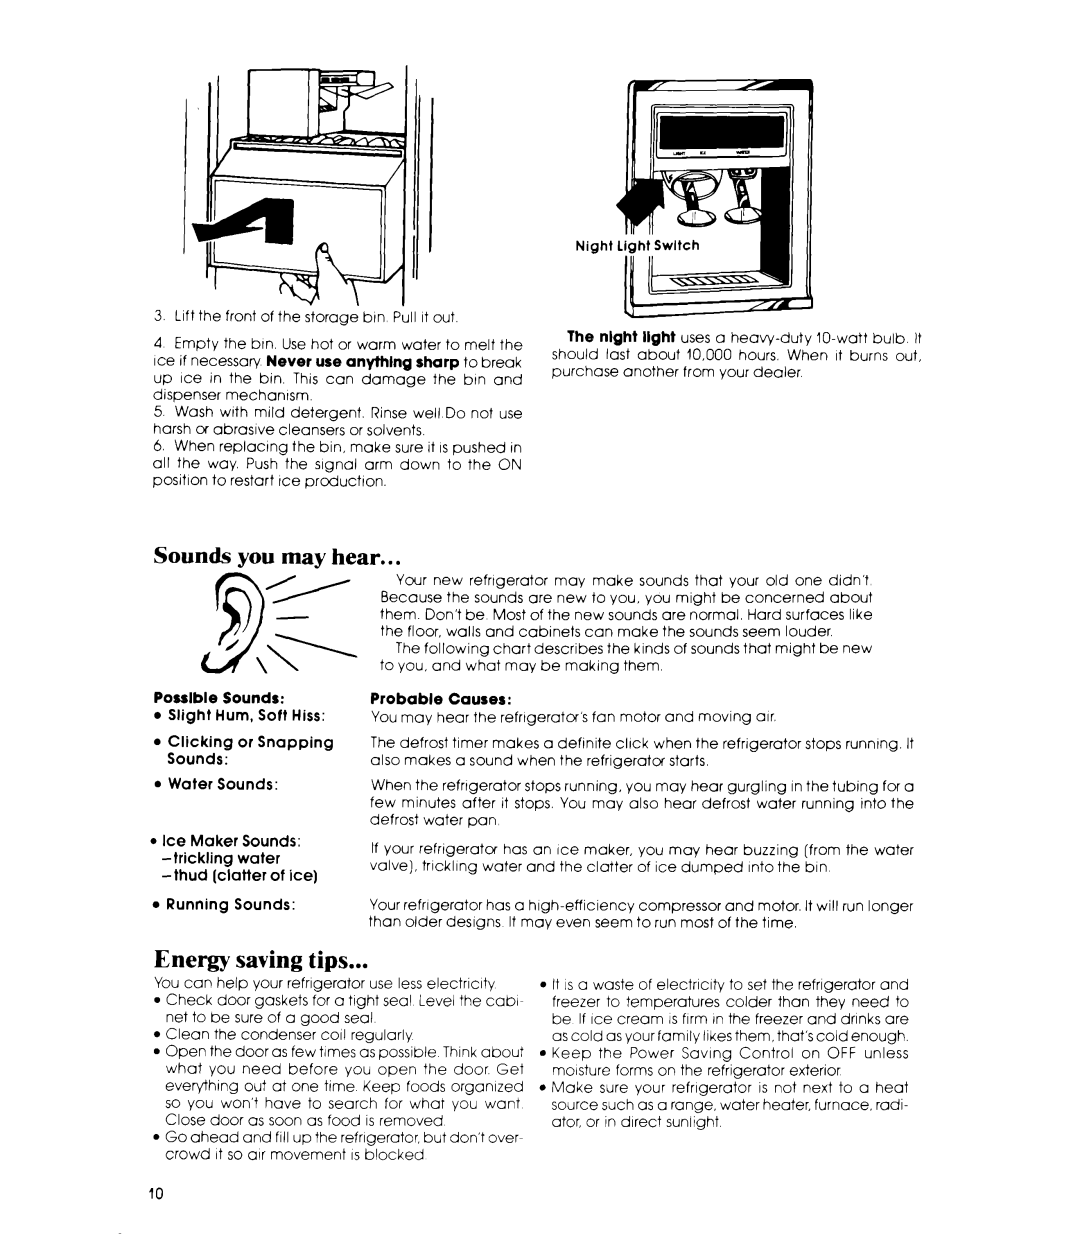 Whirlpool ED25SMIII manual Sounds you may hear, Energy saving tips, Possible Sounds, Probable Causes 